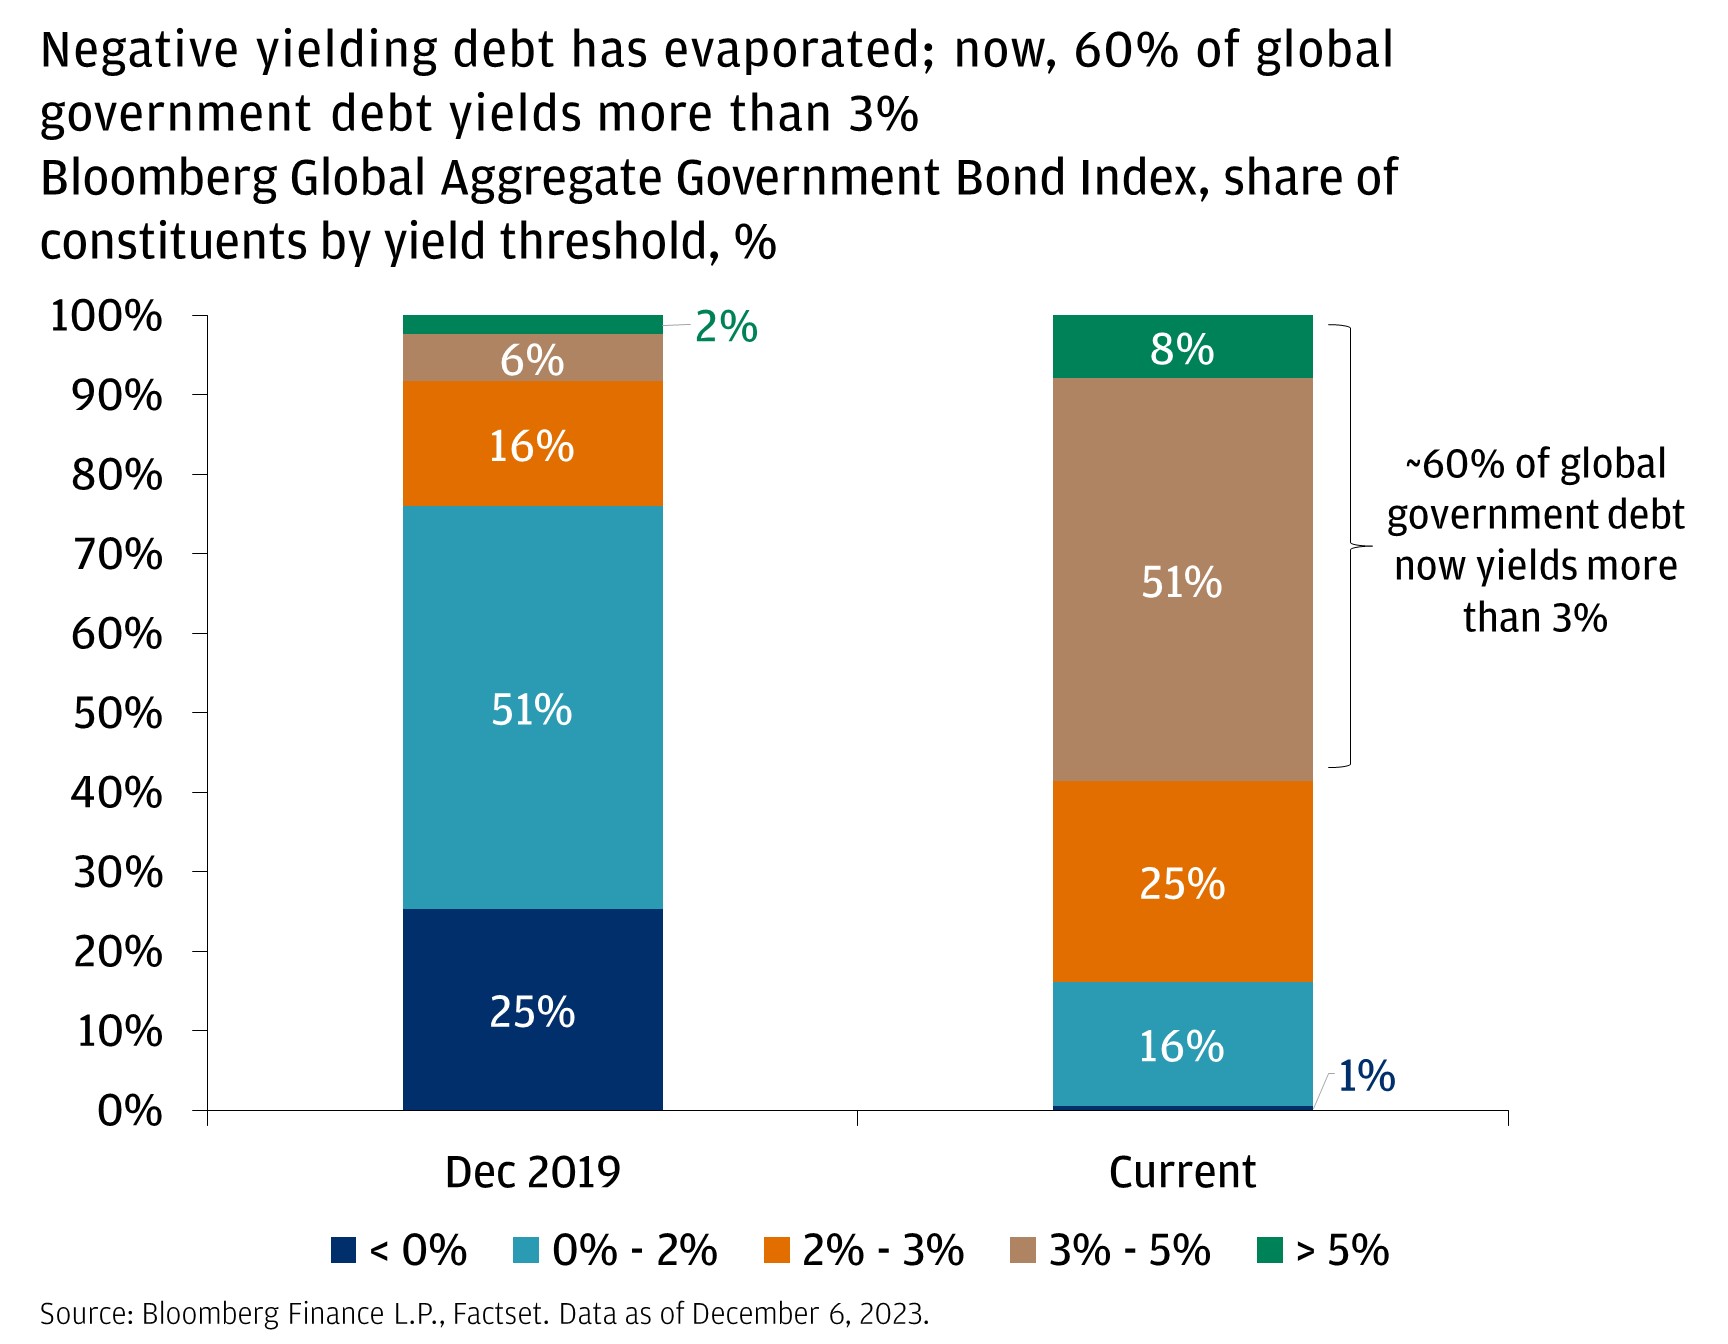 Negative yielding debt has evaporated; now, 60% of global government debt yields more than 3%